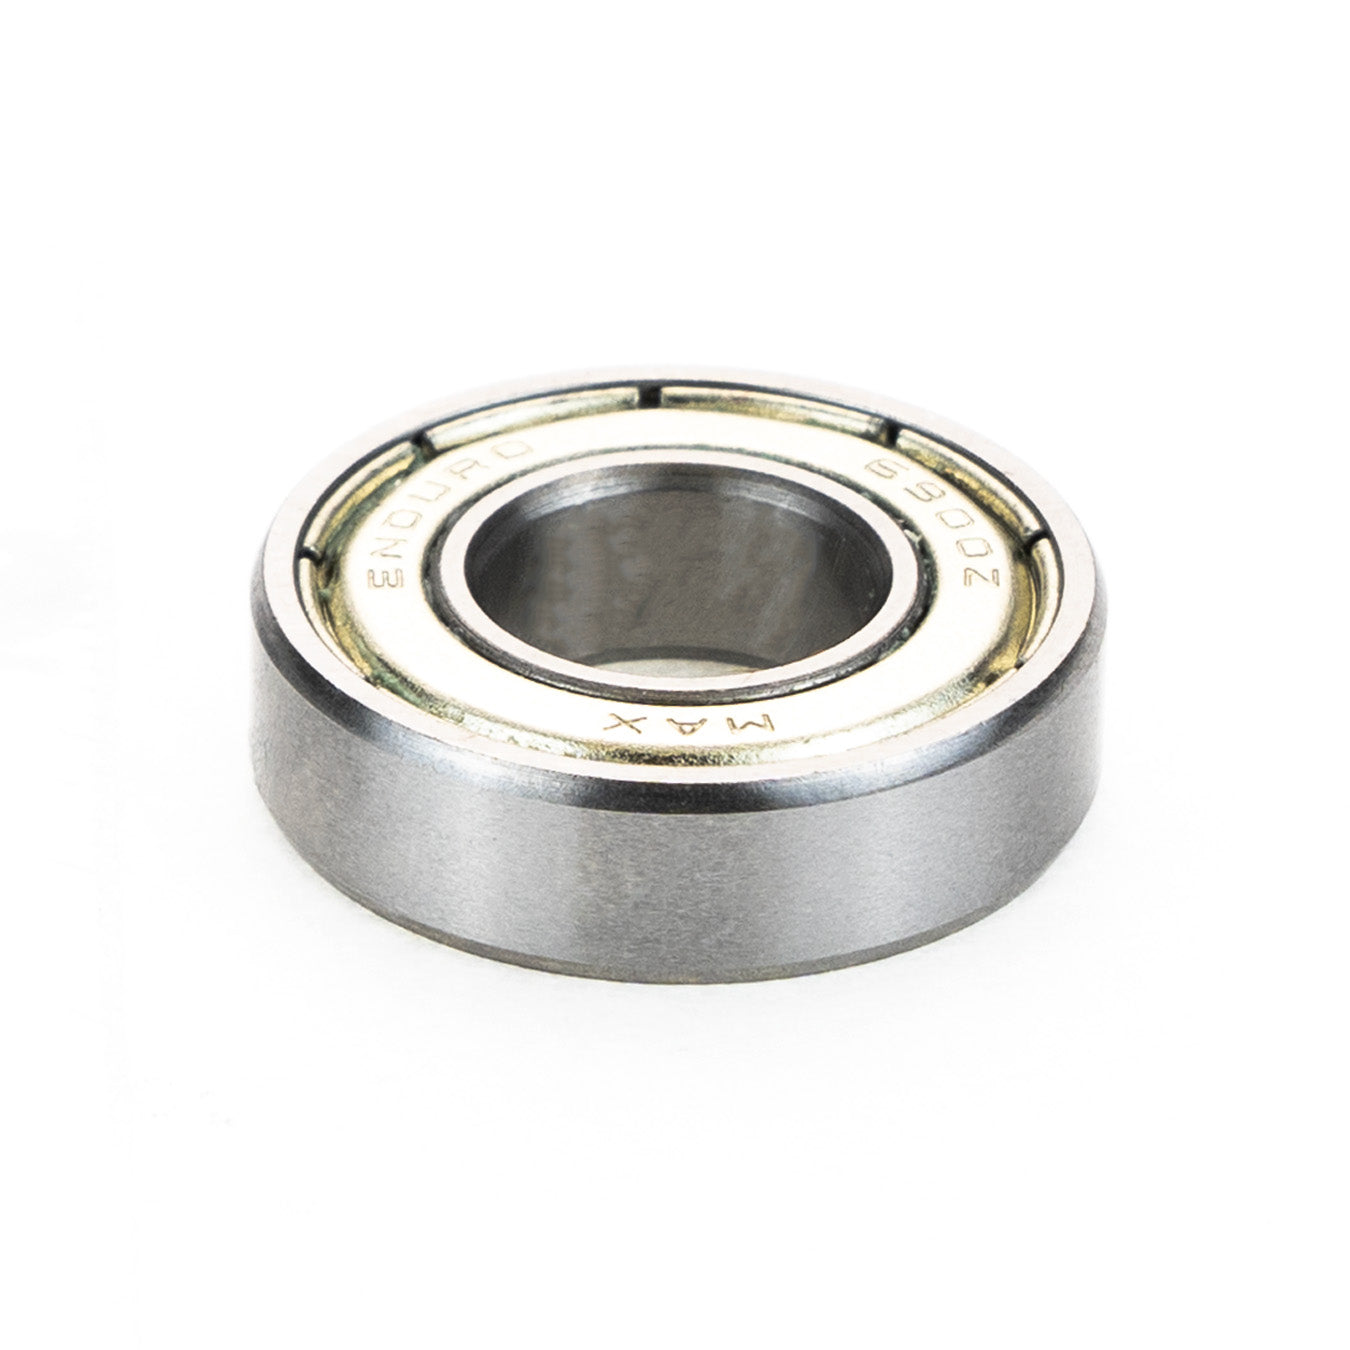 6900 1Z MAX - Max-Type, ABEC-3 radial suspension bearing - 10mm x 22mm x 6mm